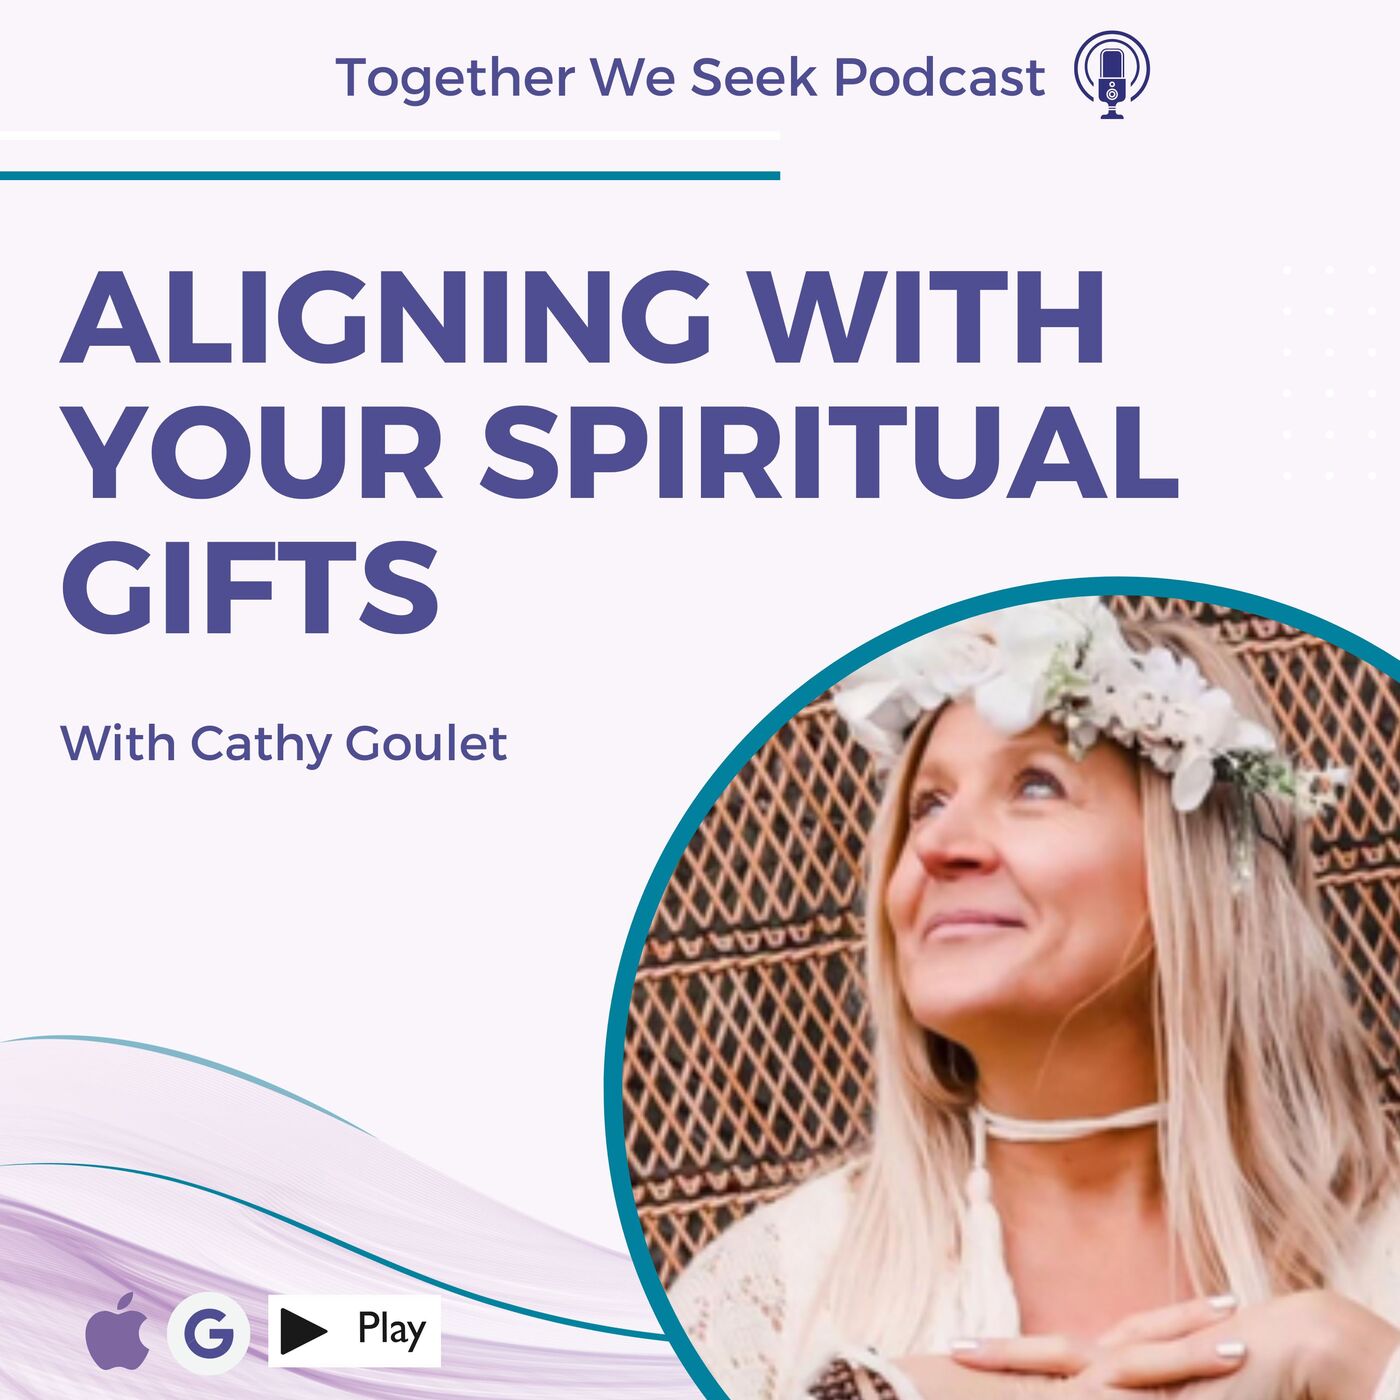 Aligning with Your Spiritual Gifts with Cathy Goulet